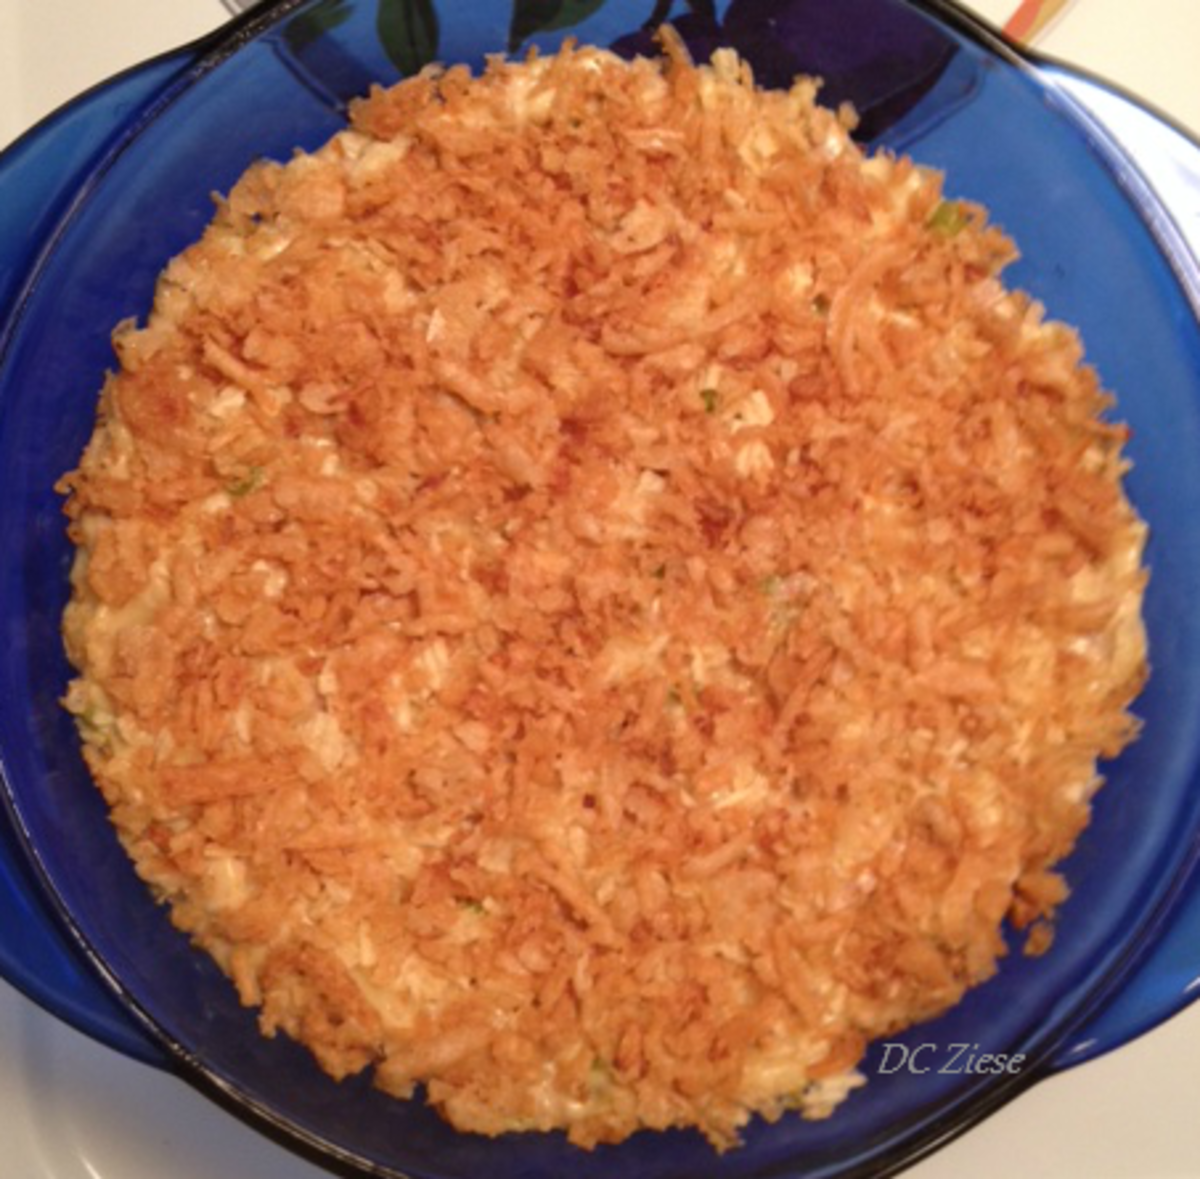 Shown: 1/2 recipe in a 2-quart casserole dish topped with 1/2 cup extra cheese, 1/2 cup "bottom-of-the-bag" lightly crushed potato chips and 1 cup French fried onions